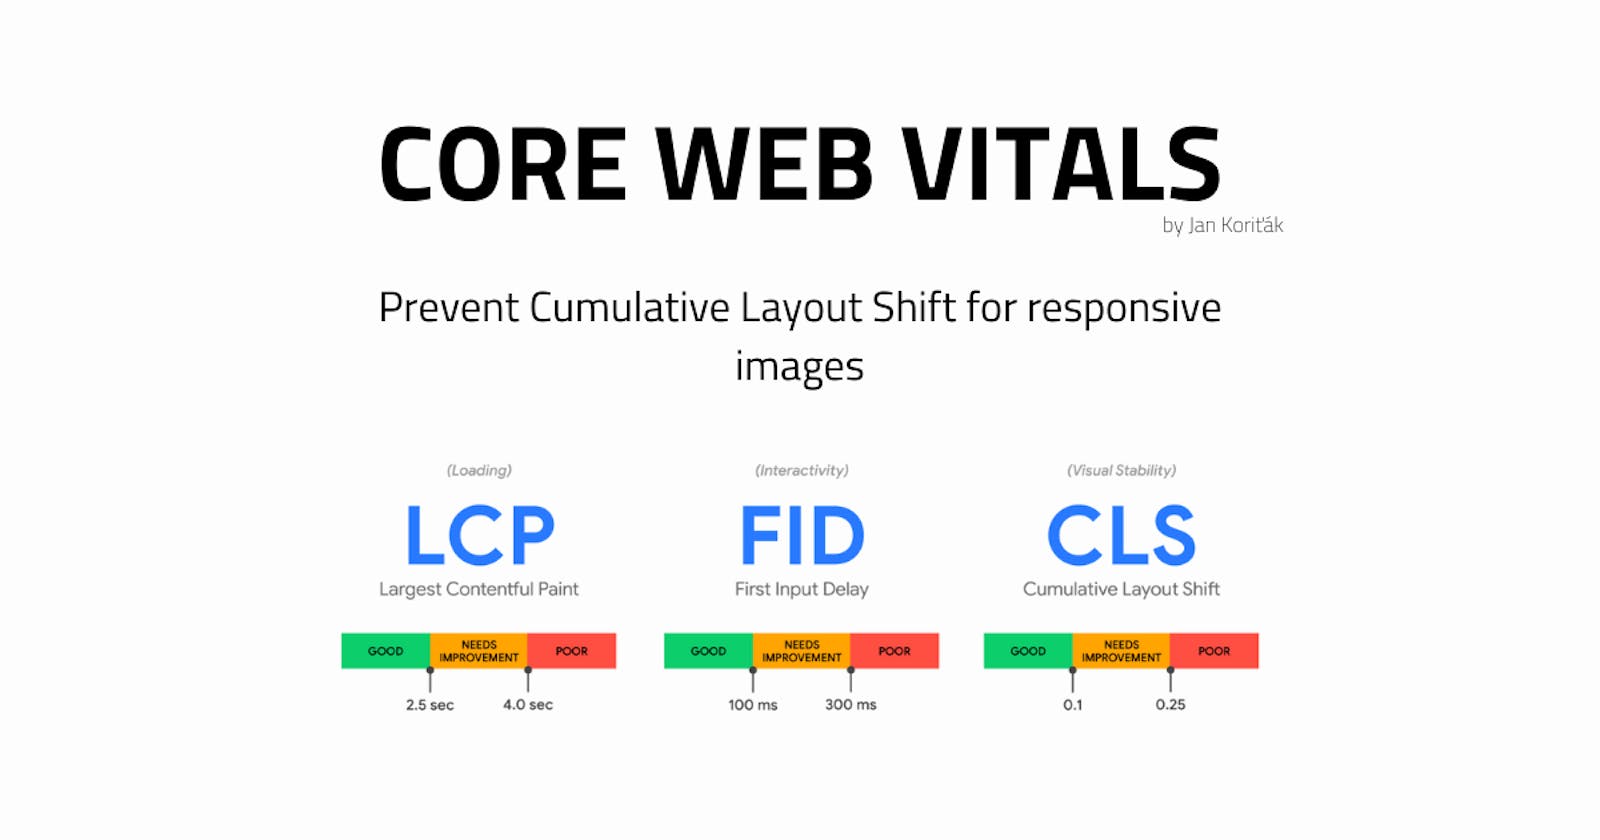 How to prevent Cumulative Layout Shift for responsive images